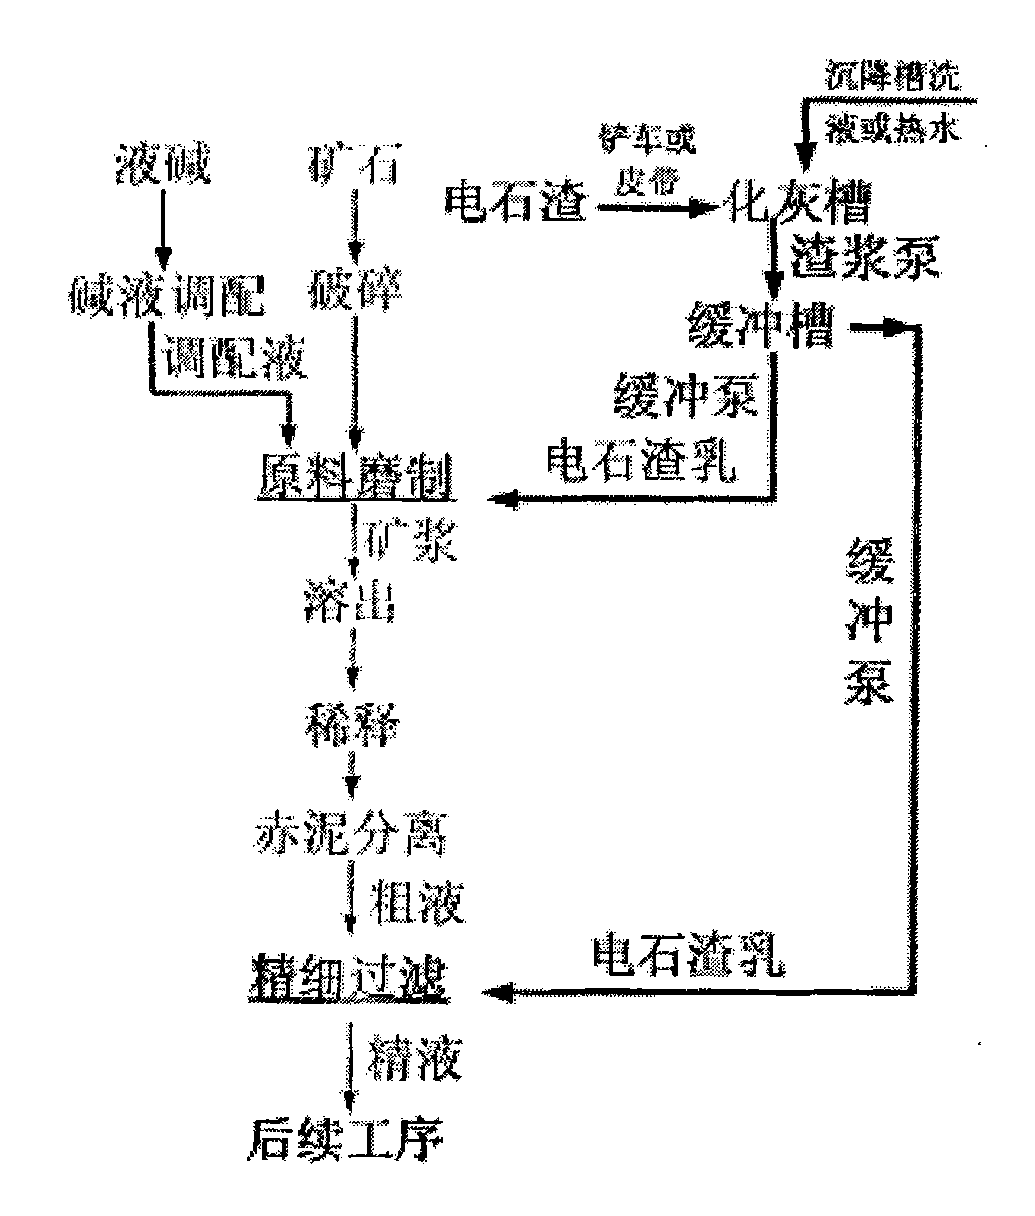 Process for Bayer process aluminum oxide production by replacing carbide slag with lime